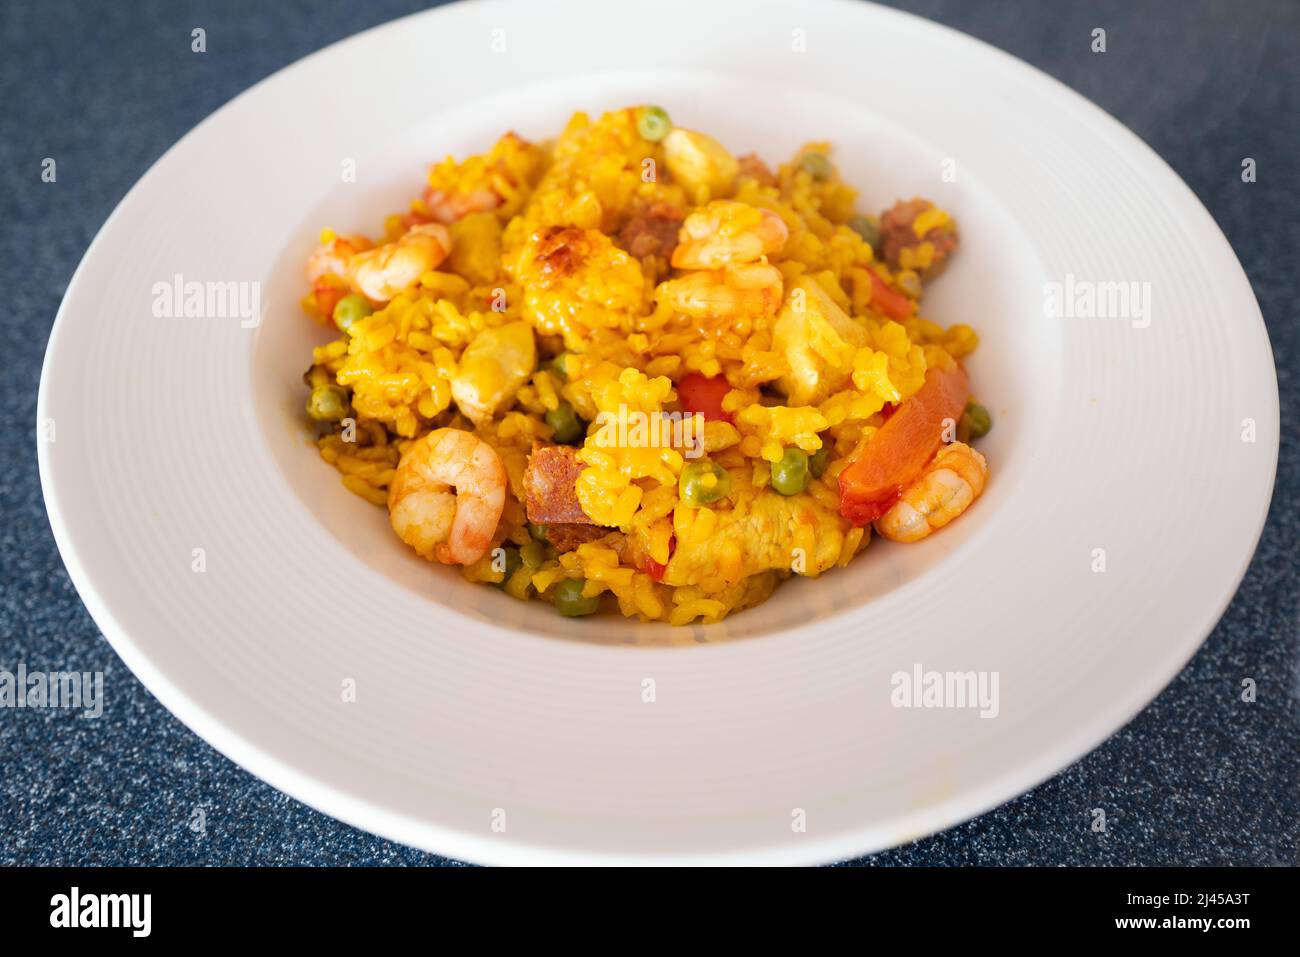 Prawns and chorizo sausage in a home made rice paella dish. There is also chicken with onion, peas and peppers in the meal. It is served in a round wh Stock Photo